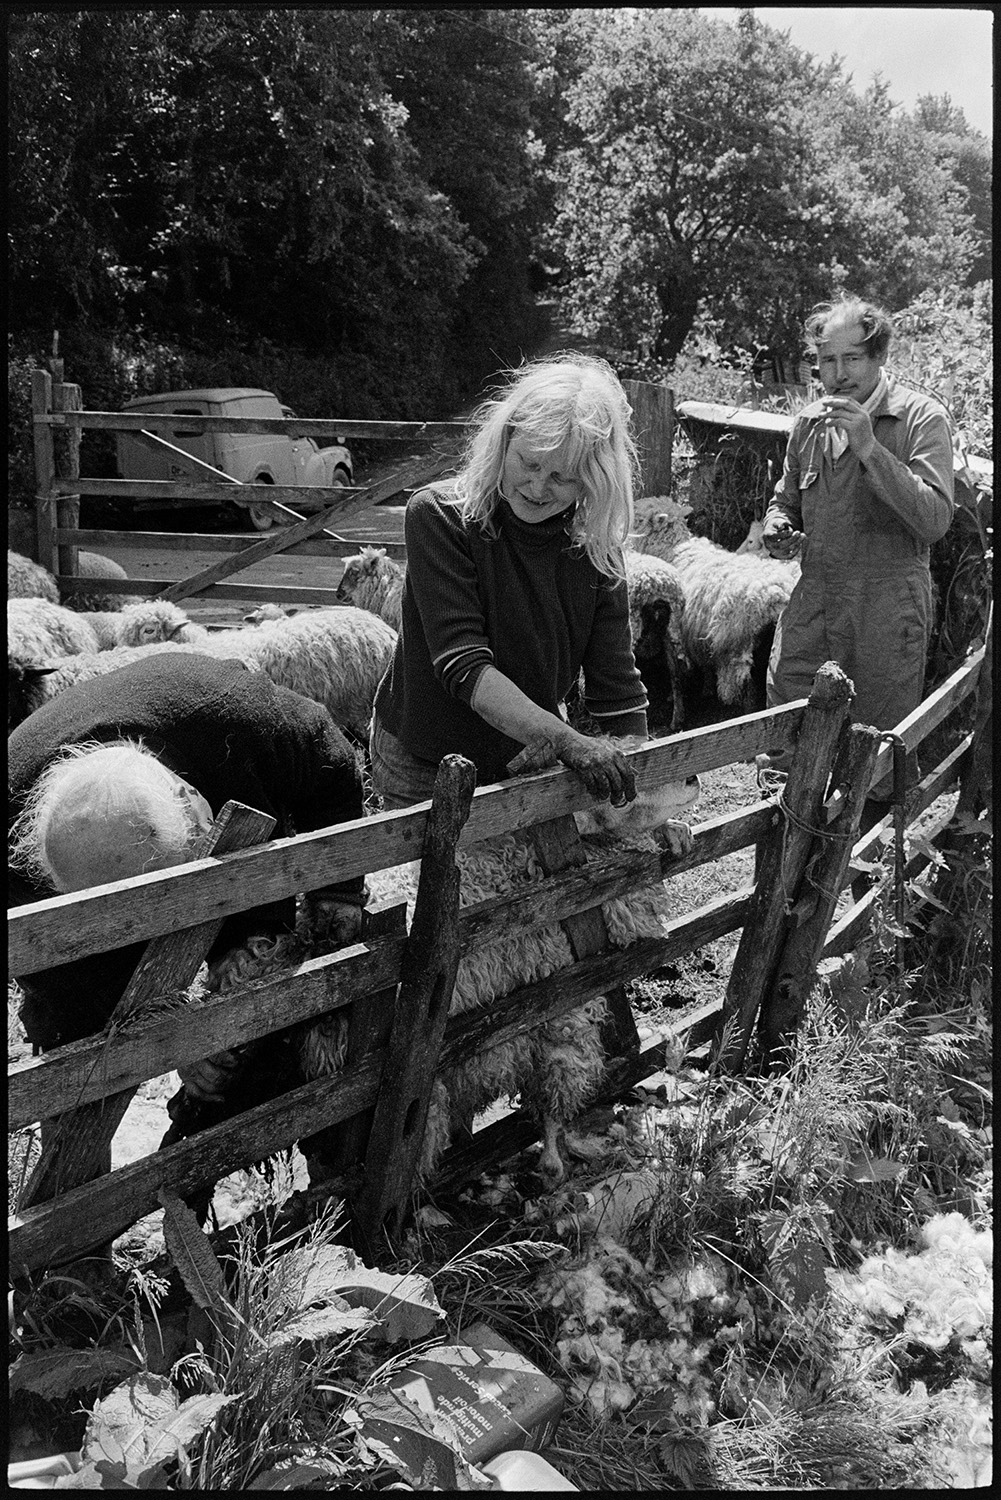 Man and woman farmer removing dirty wool from sheep's bottoms.
[Archie Parkhouse, Jo Curzon and another man docking sheep in a pen at Millhams, Dolton. An old Morris van is parked in lane outside the field.]